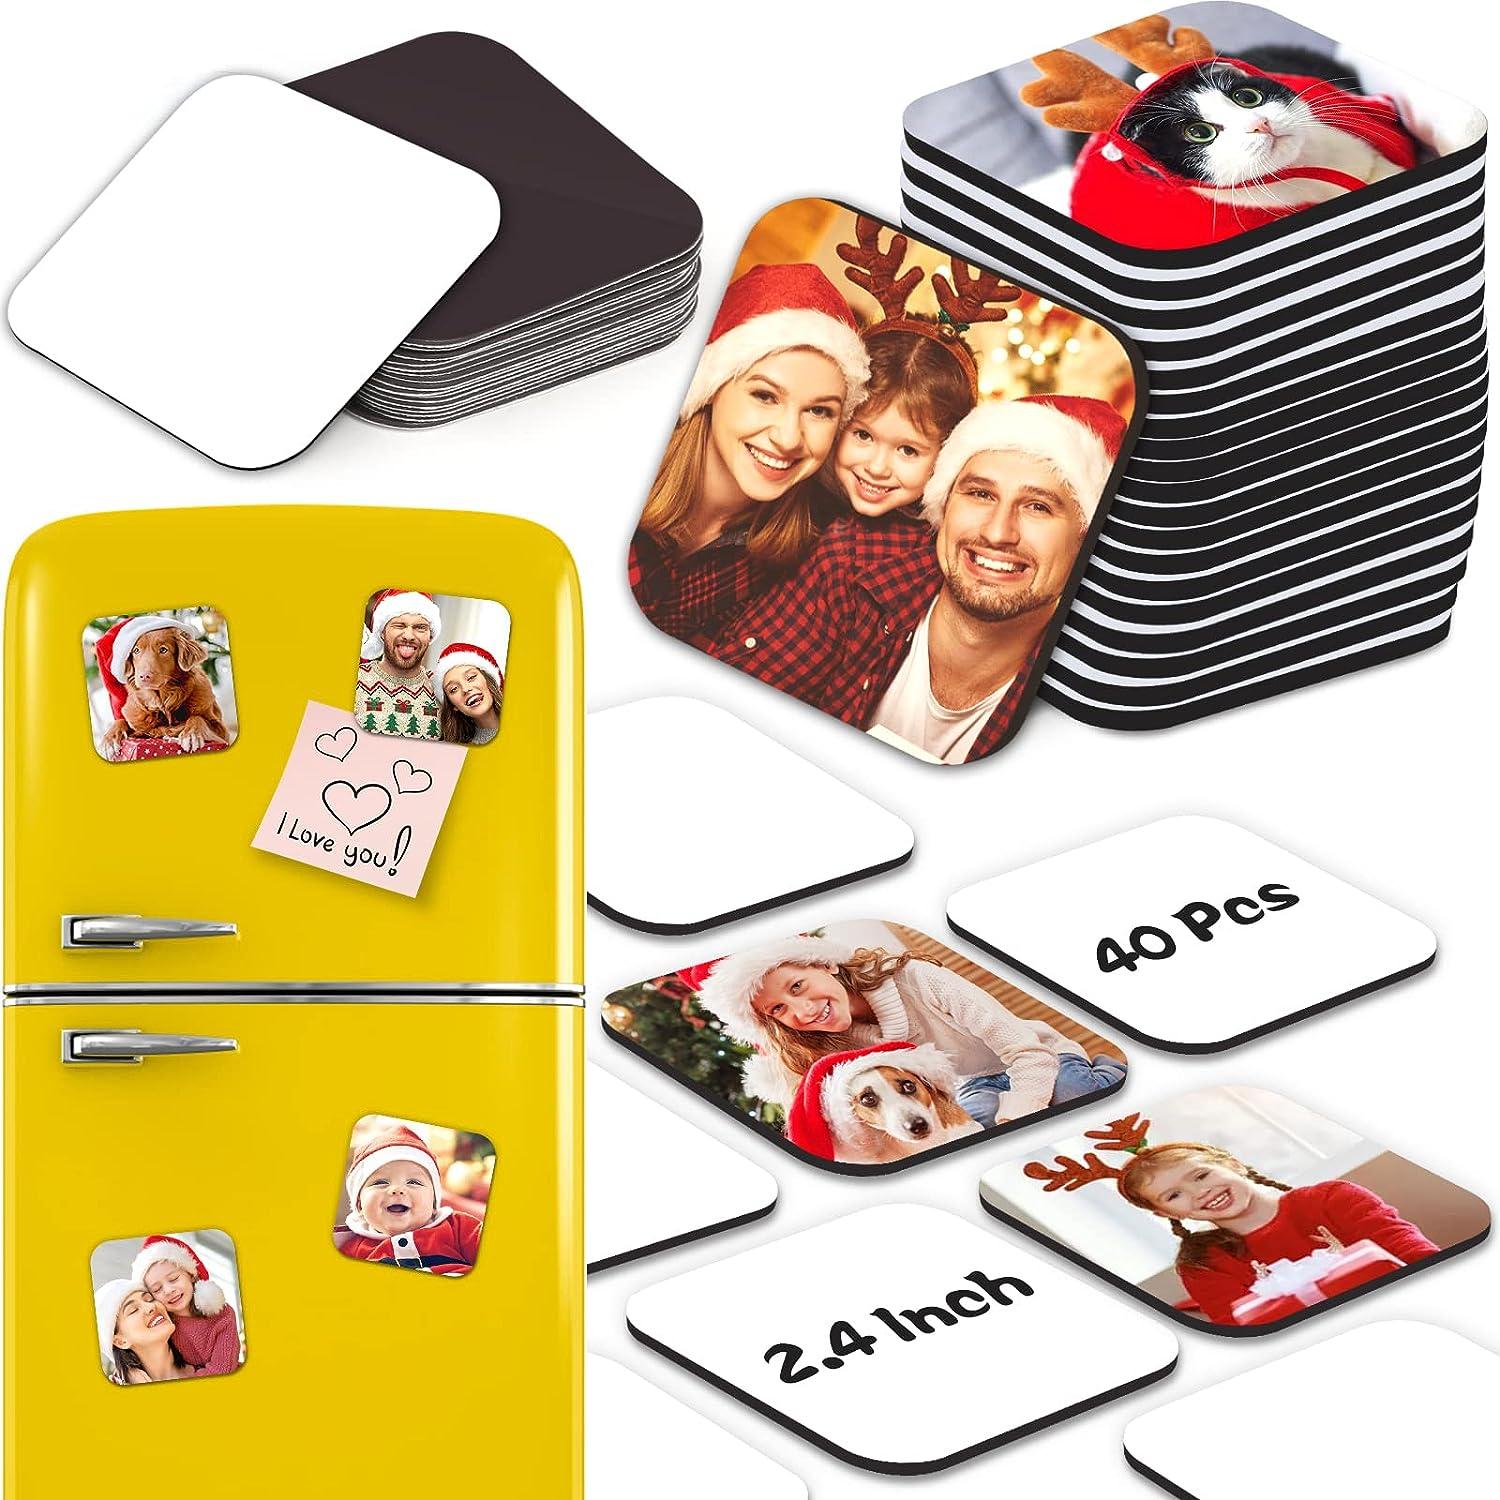 34PCS Sublimation Magnets Blanks, 3X2.2 In Personalized Fridge